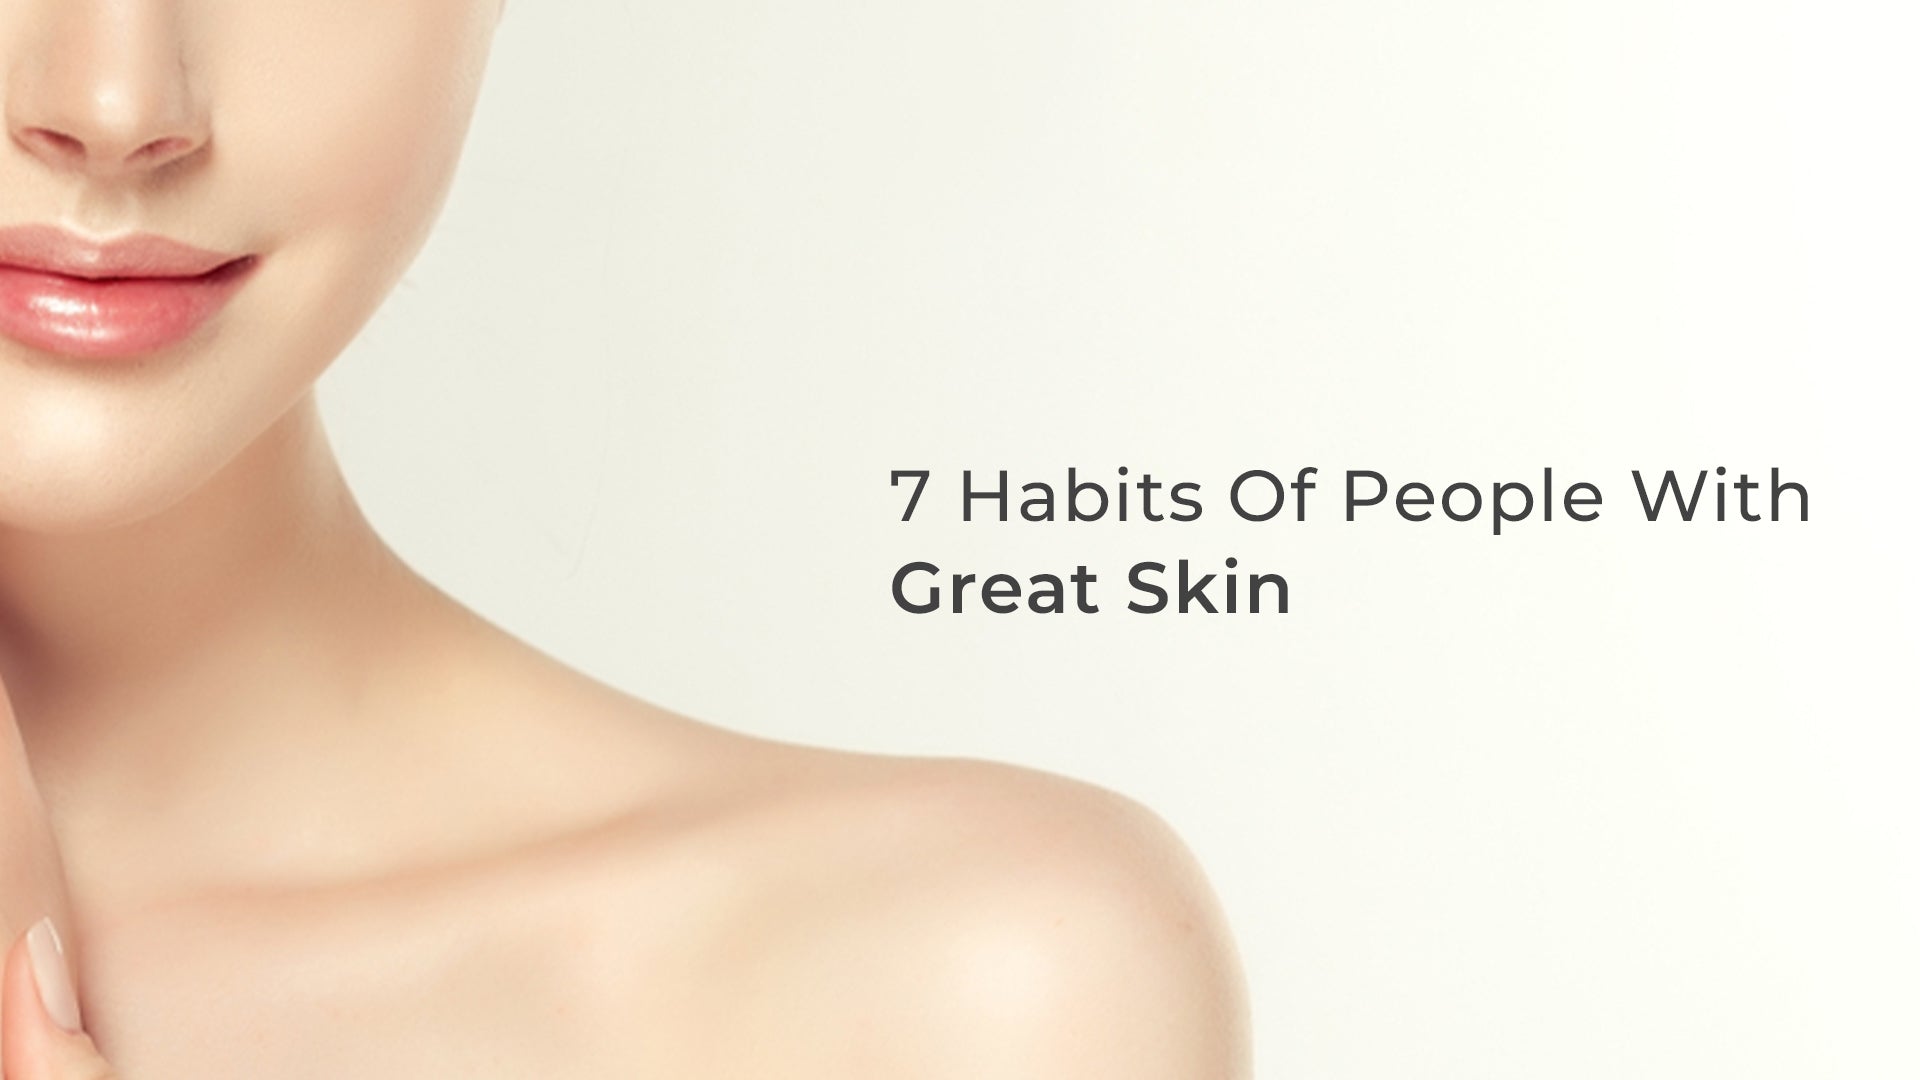 7 Habits of People with Great Skin